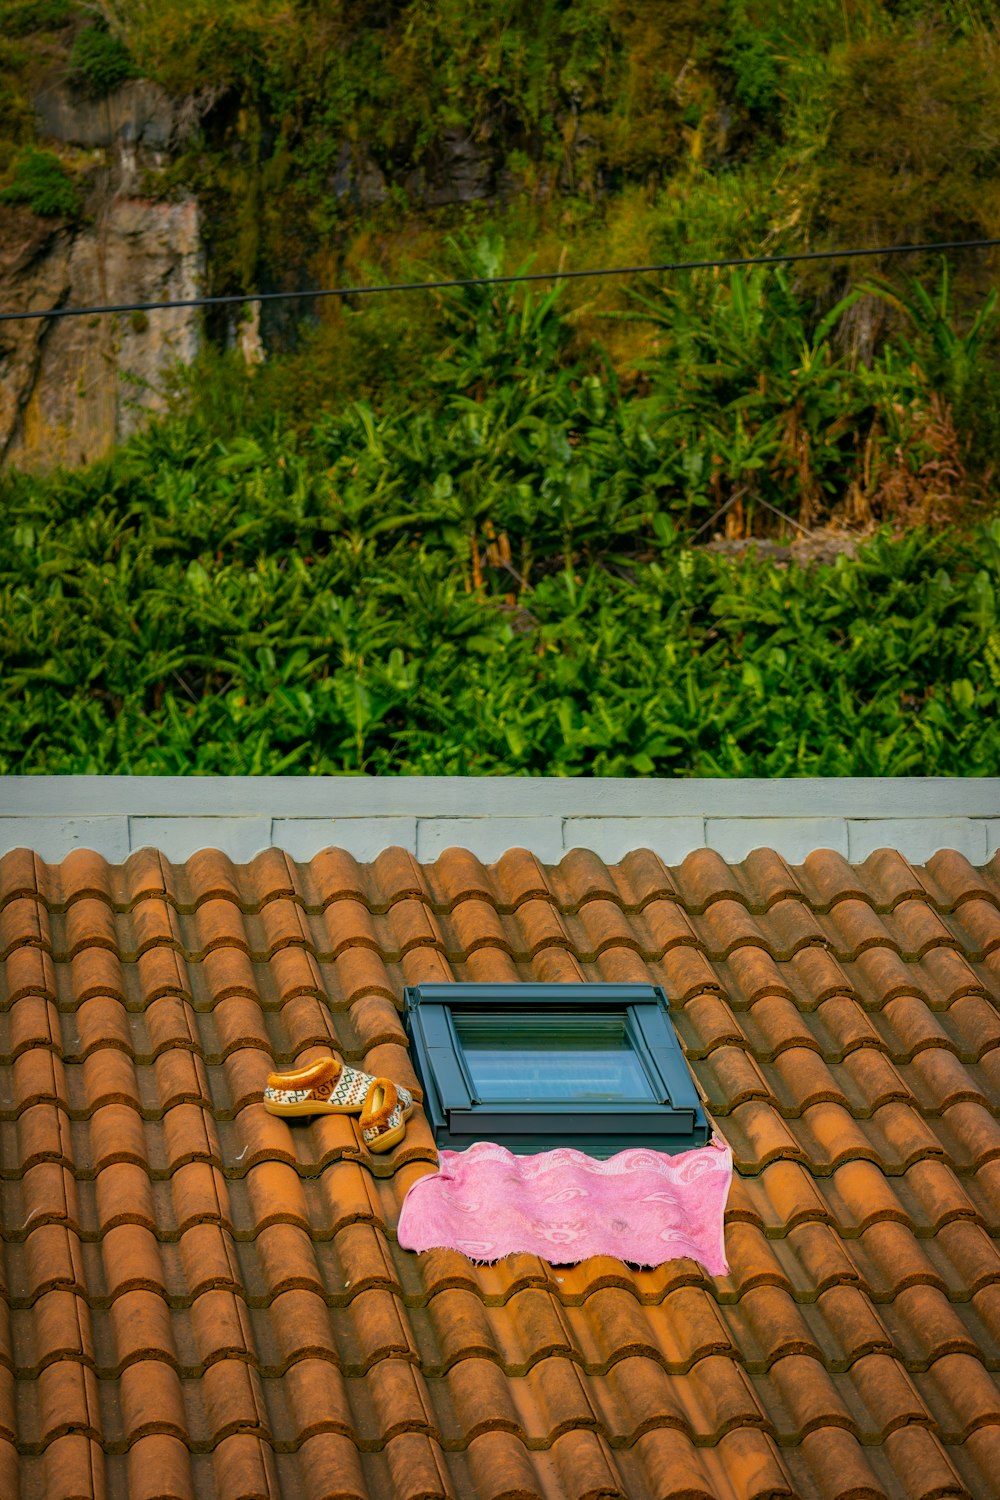 a pair of shoes sitting on top of a tiled roof